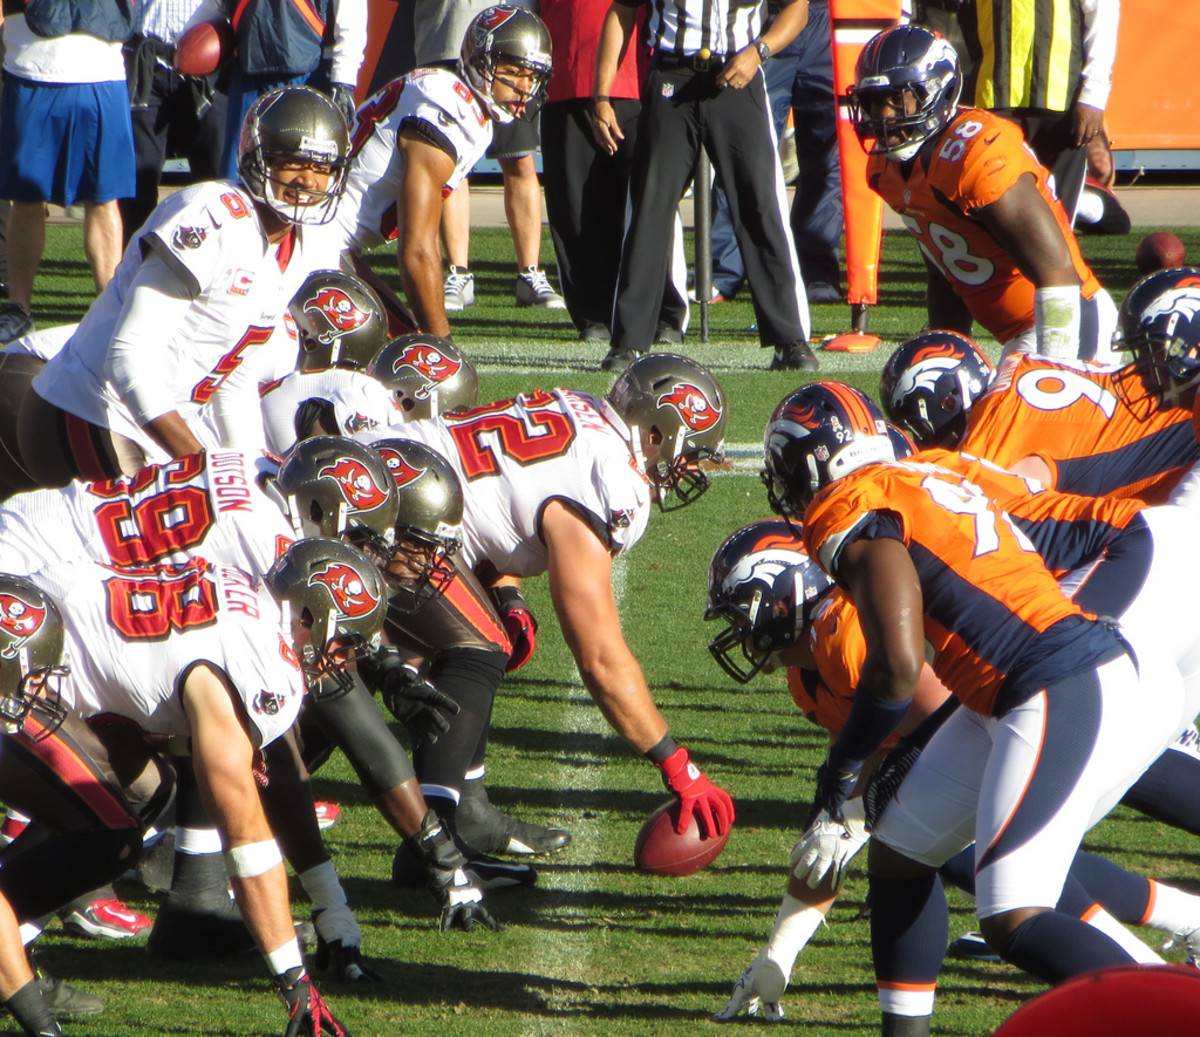 The line of scrimmage between two teams.